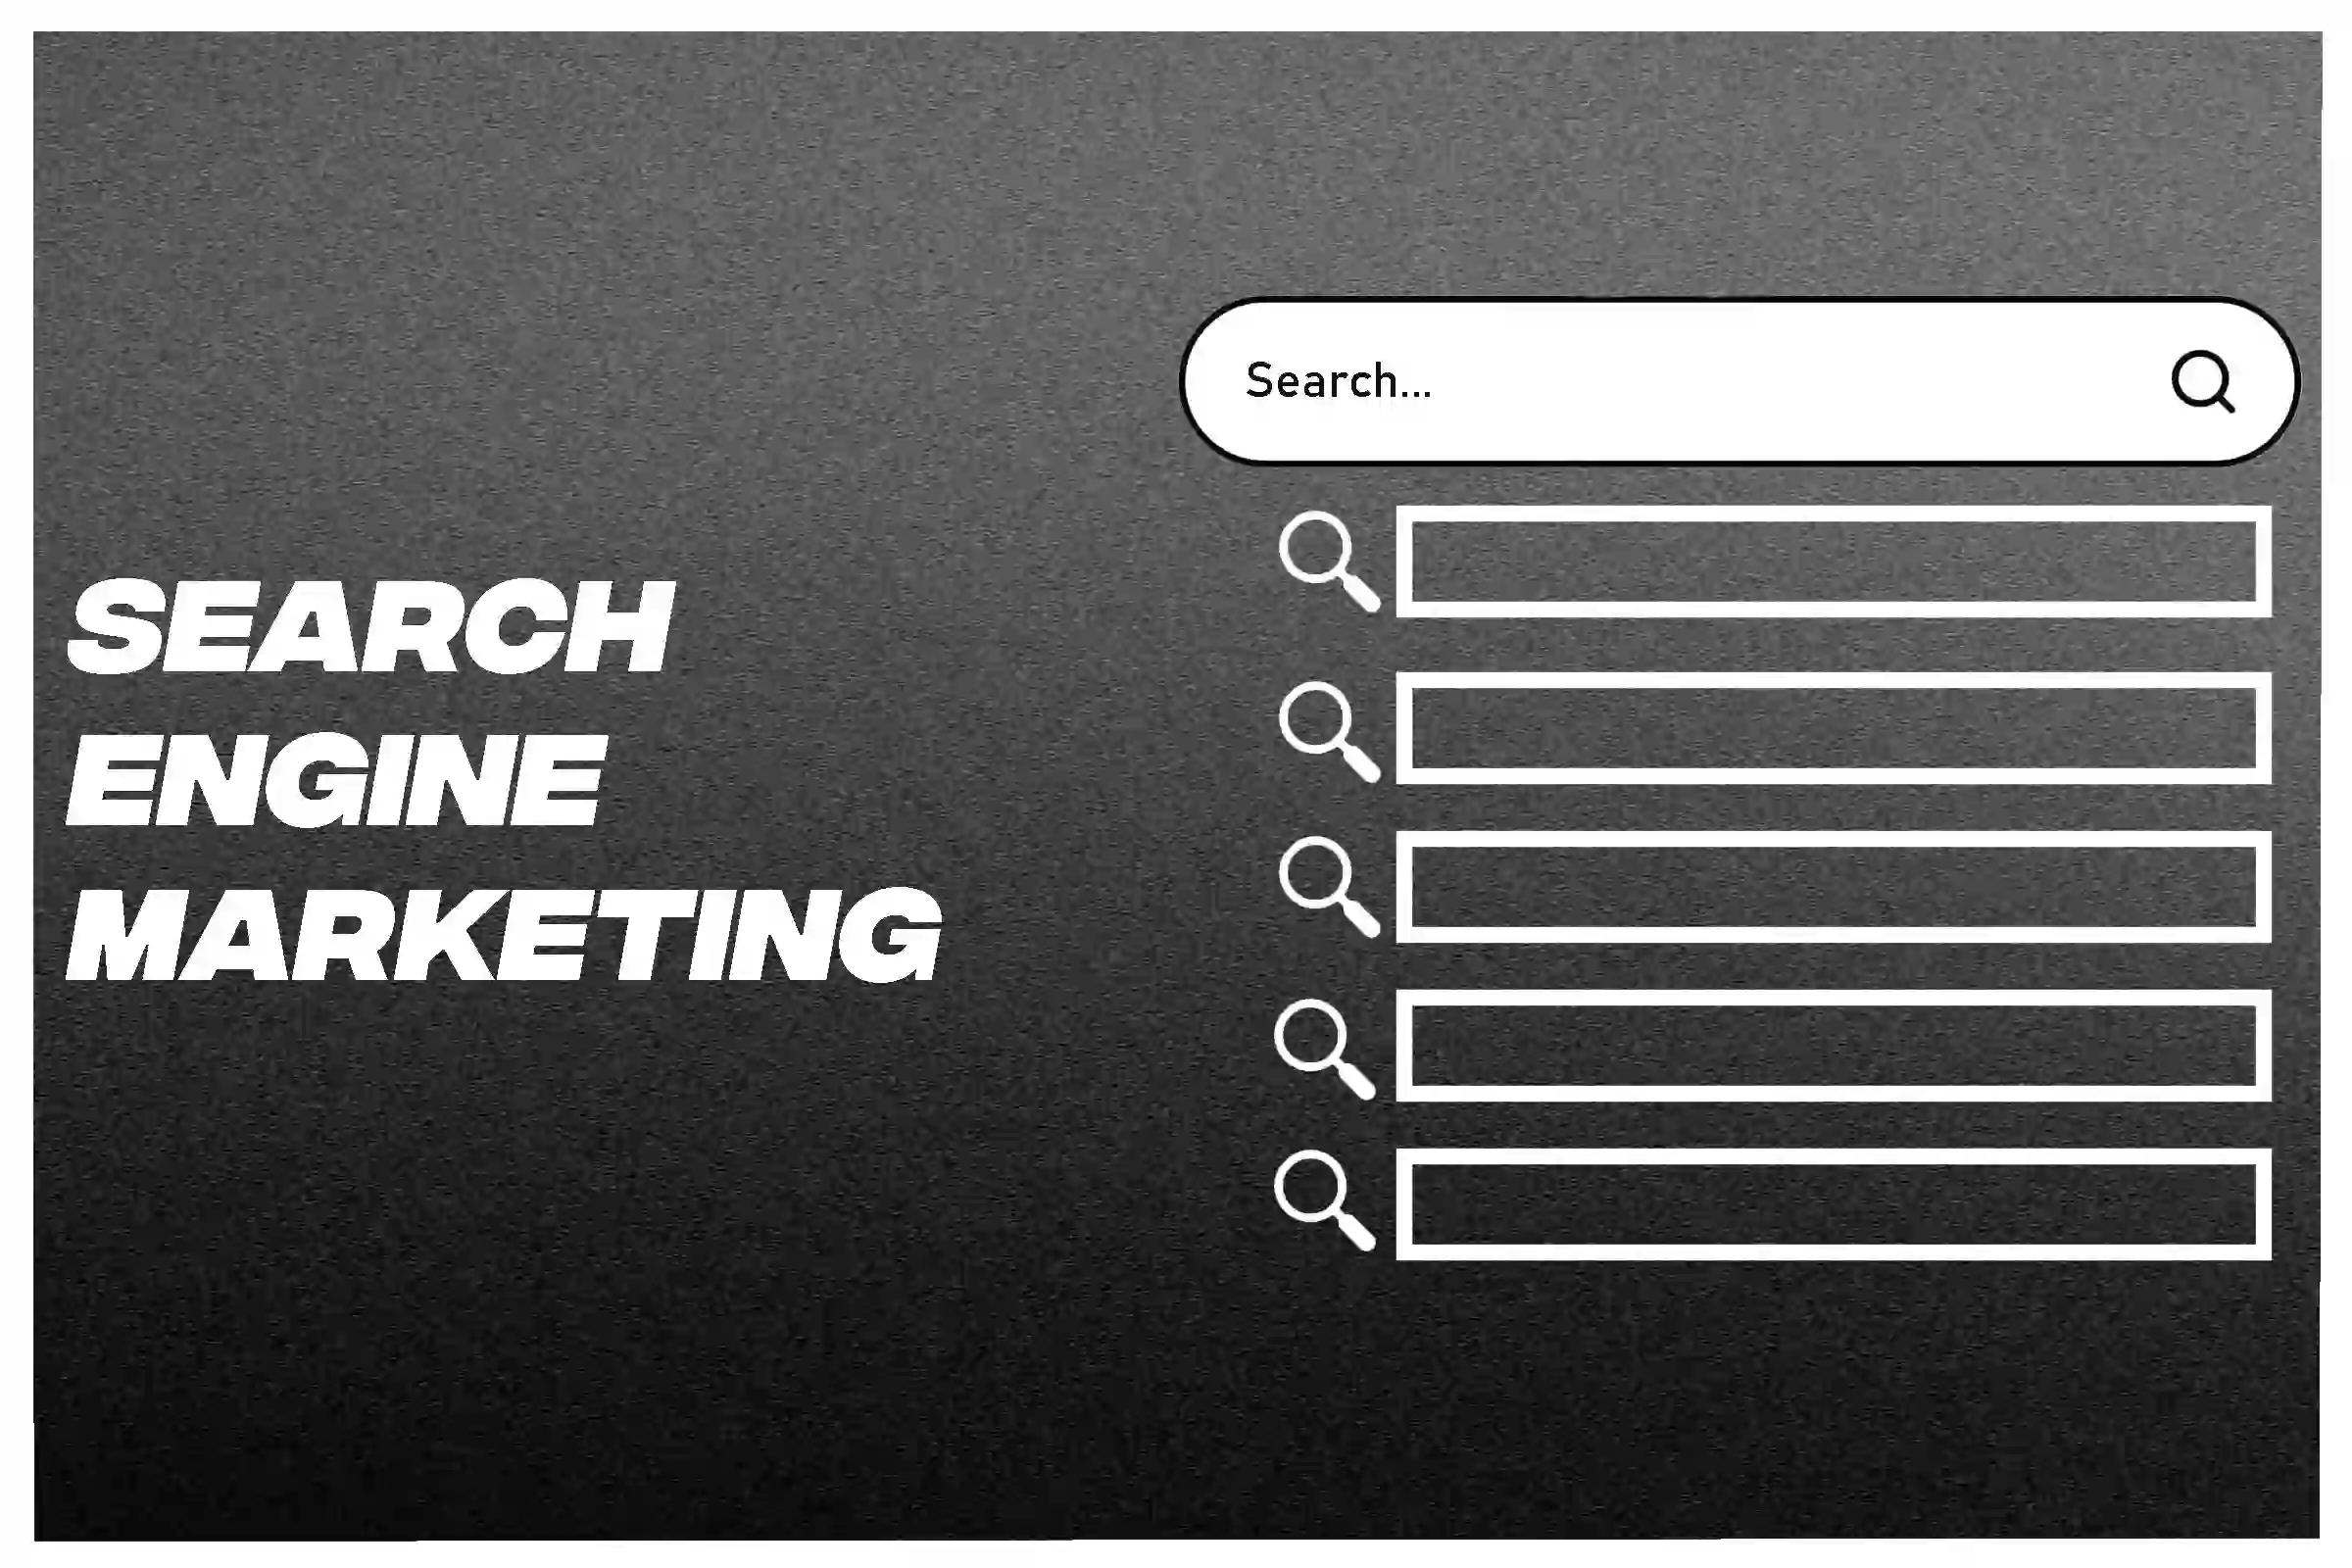 What is Search Engine Marketing and how does it work